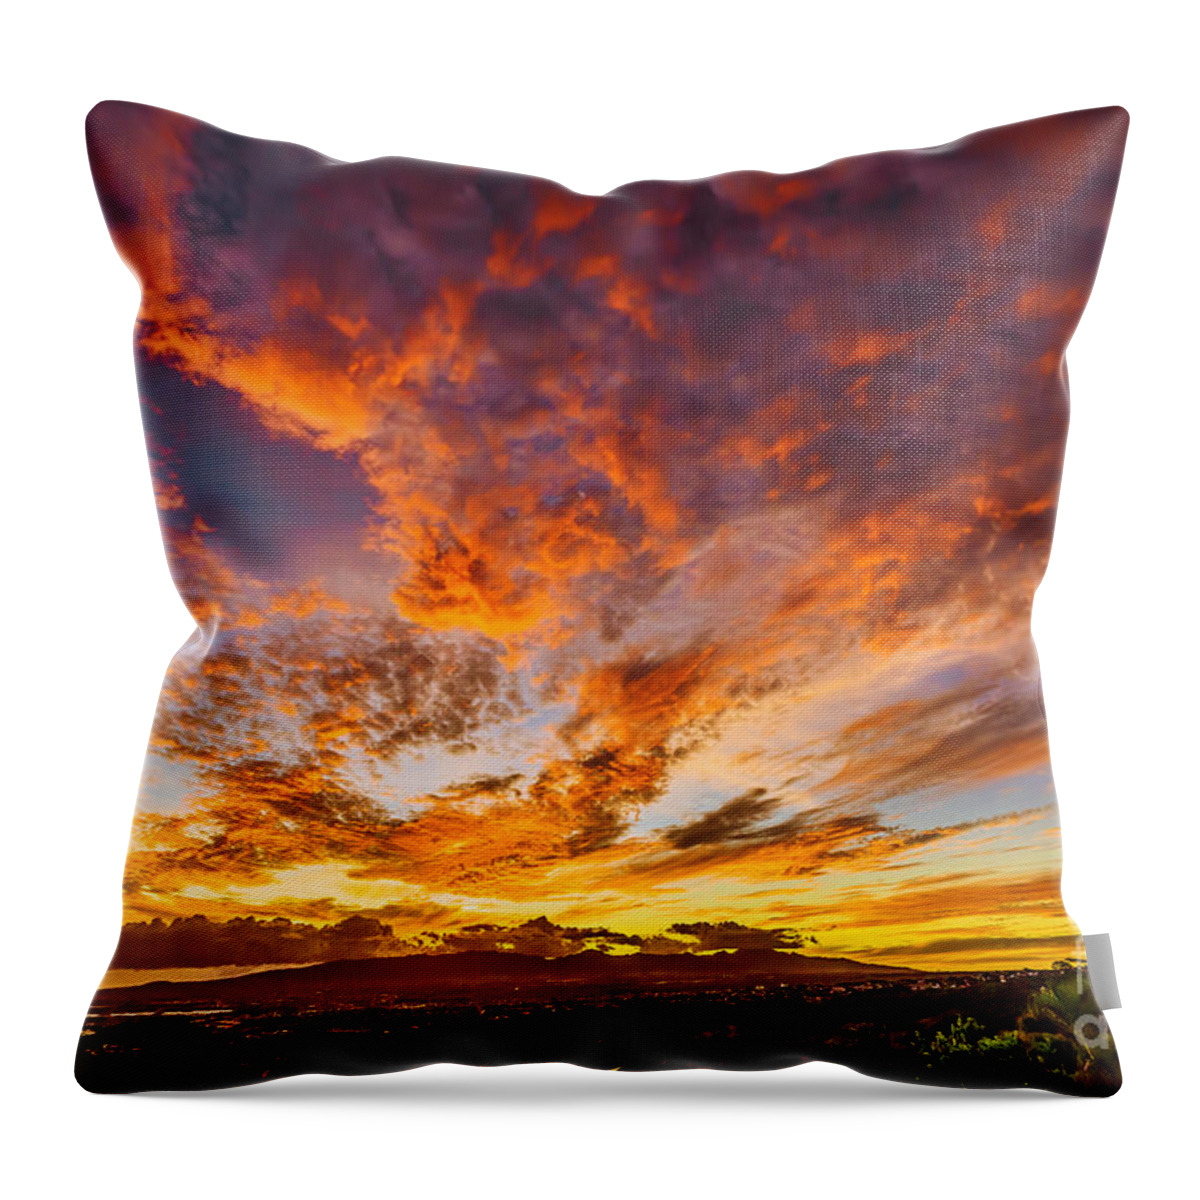 Waianae Mountain Range Throw Pillow featuring the photograph Red Sunset Behind the Waianae Mountain Range by Aloha Art